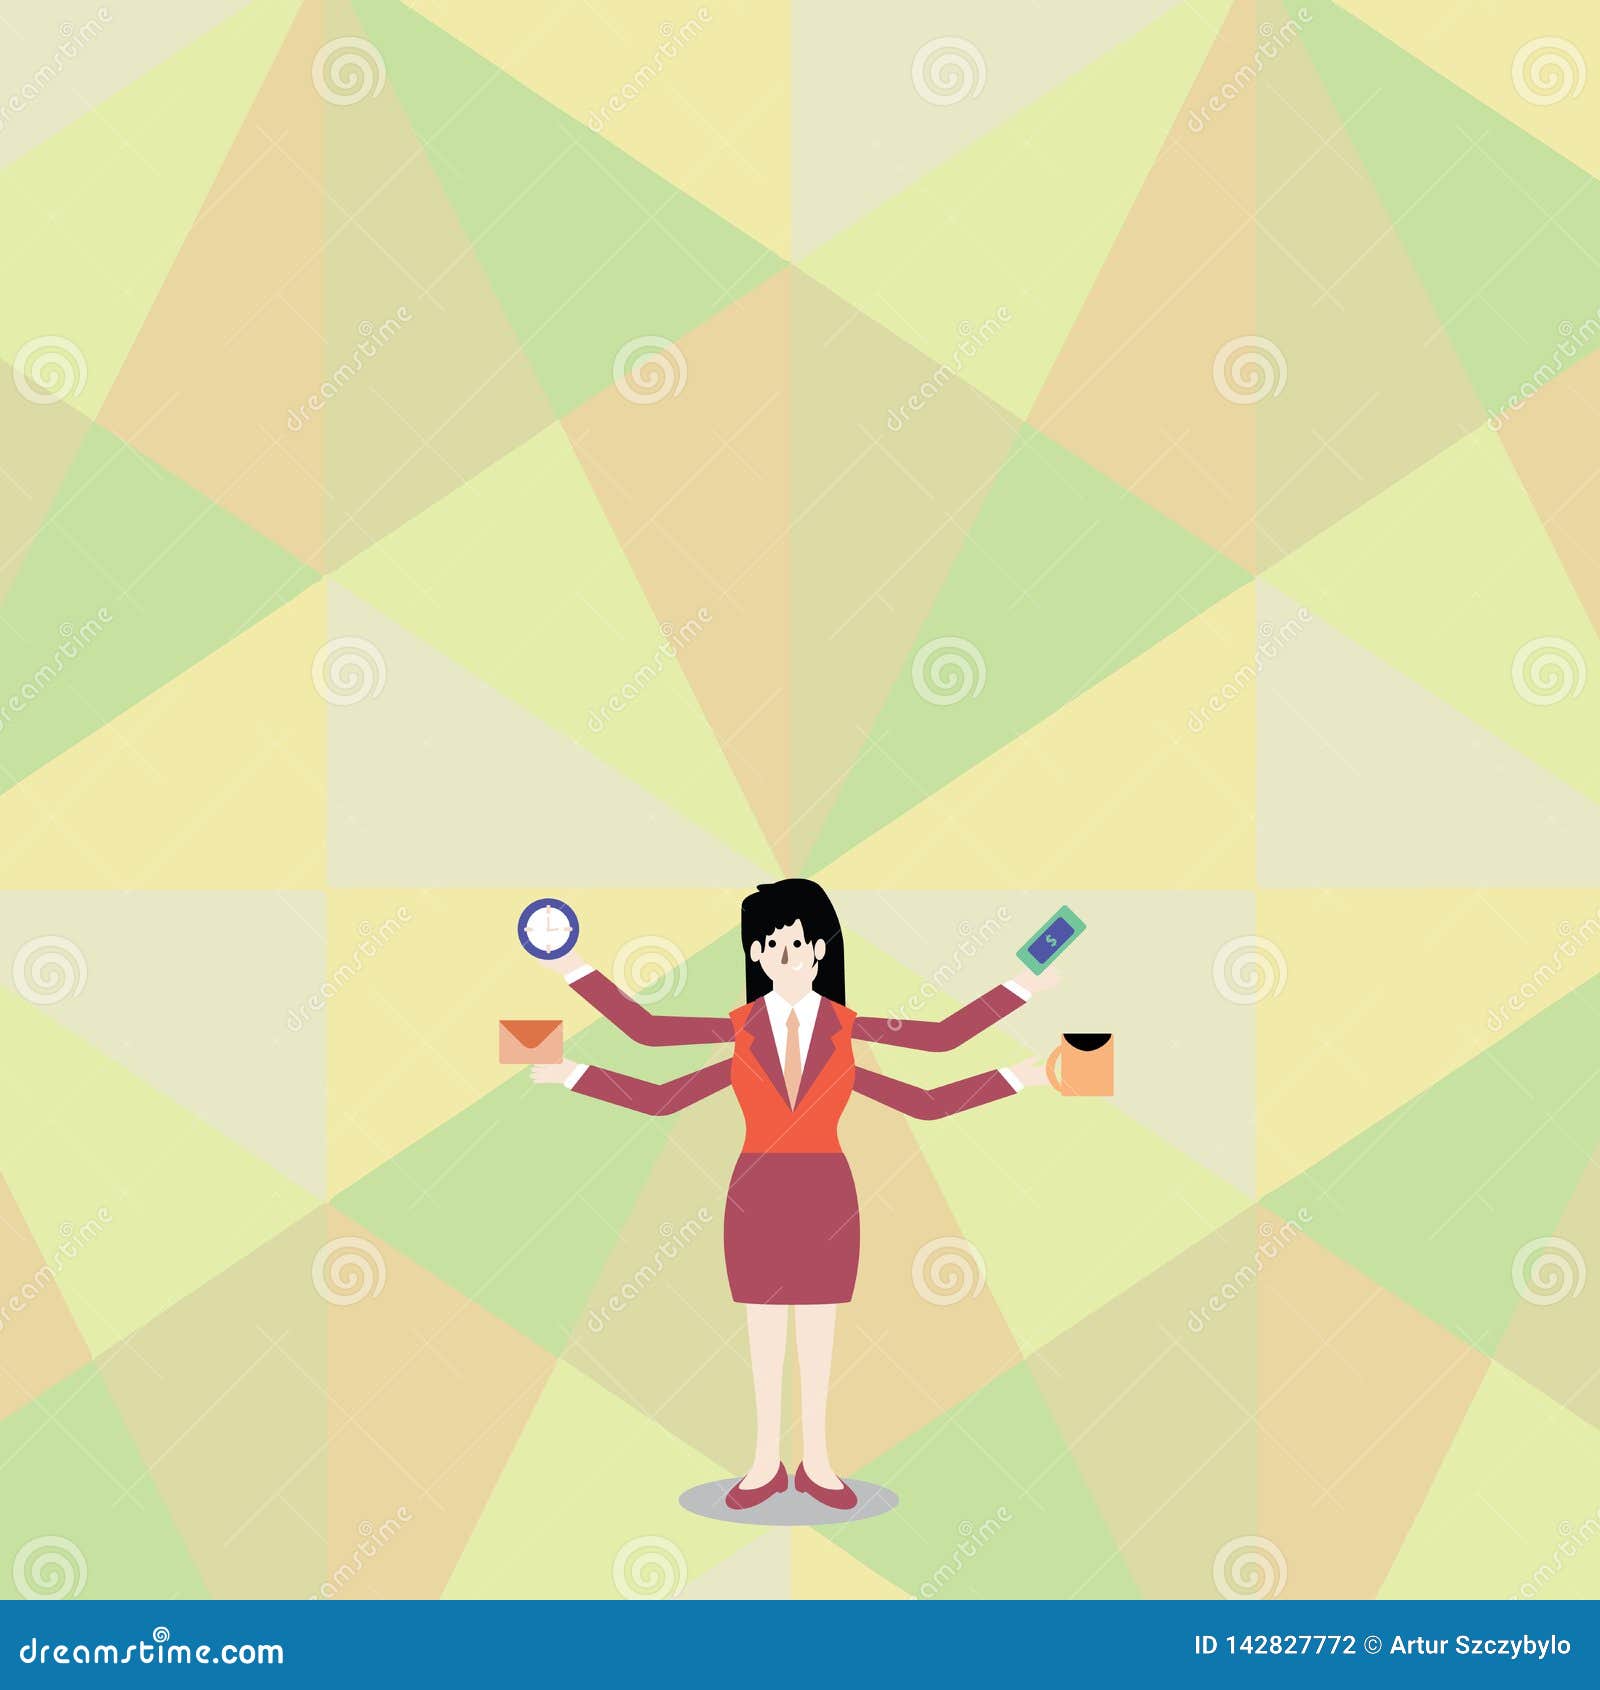 https://thumbs.dreamstime.com/z/woman-business-suit-standing-four-arms-exending-sideways-businesswoman-limbs-holding-workers-stuff-businesswoman-142827772.jpg